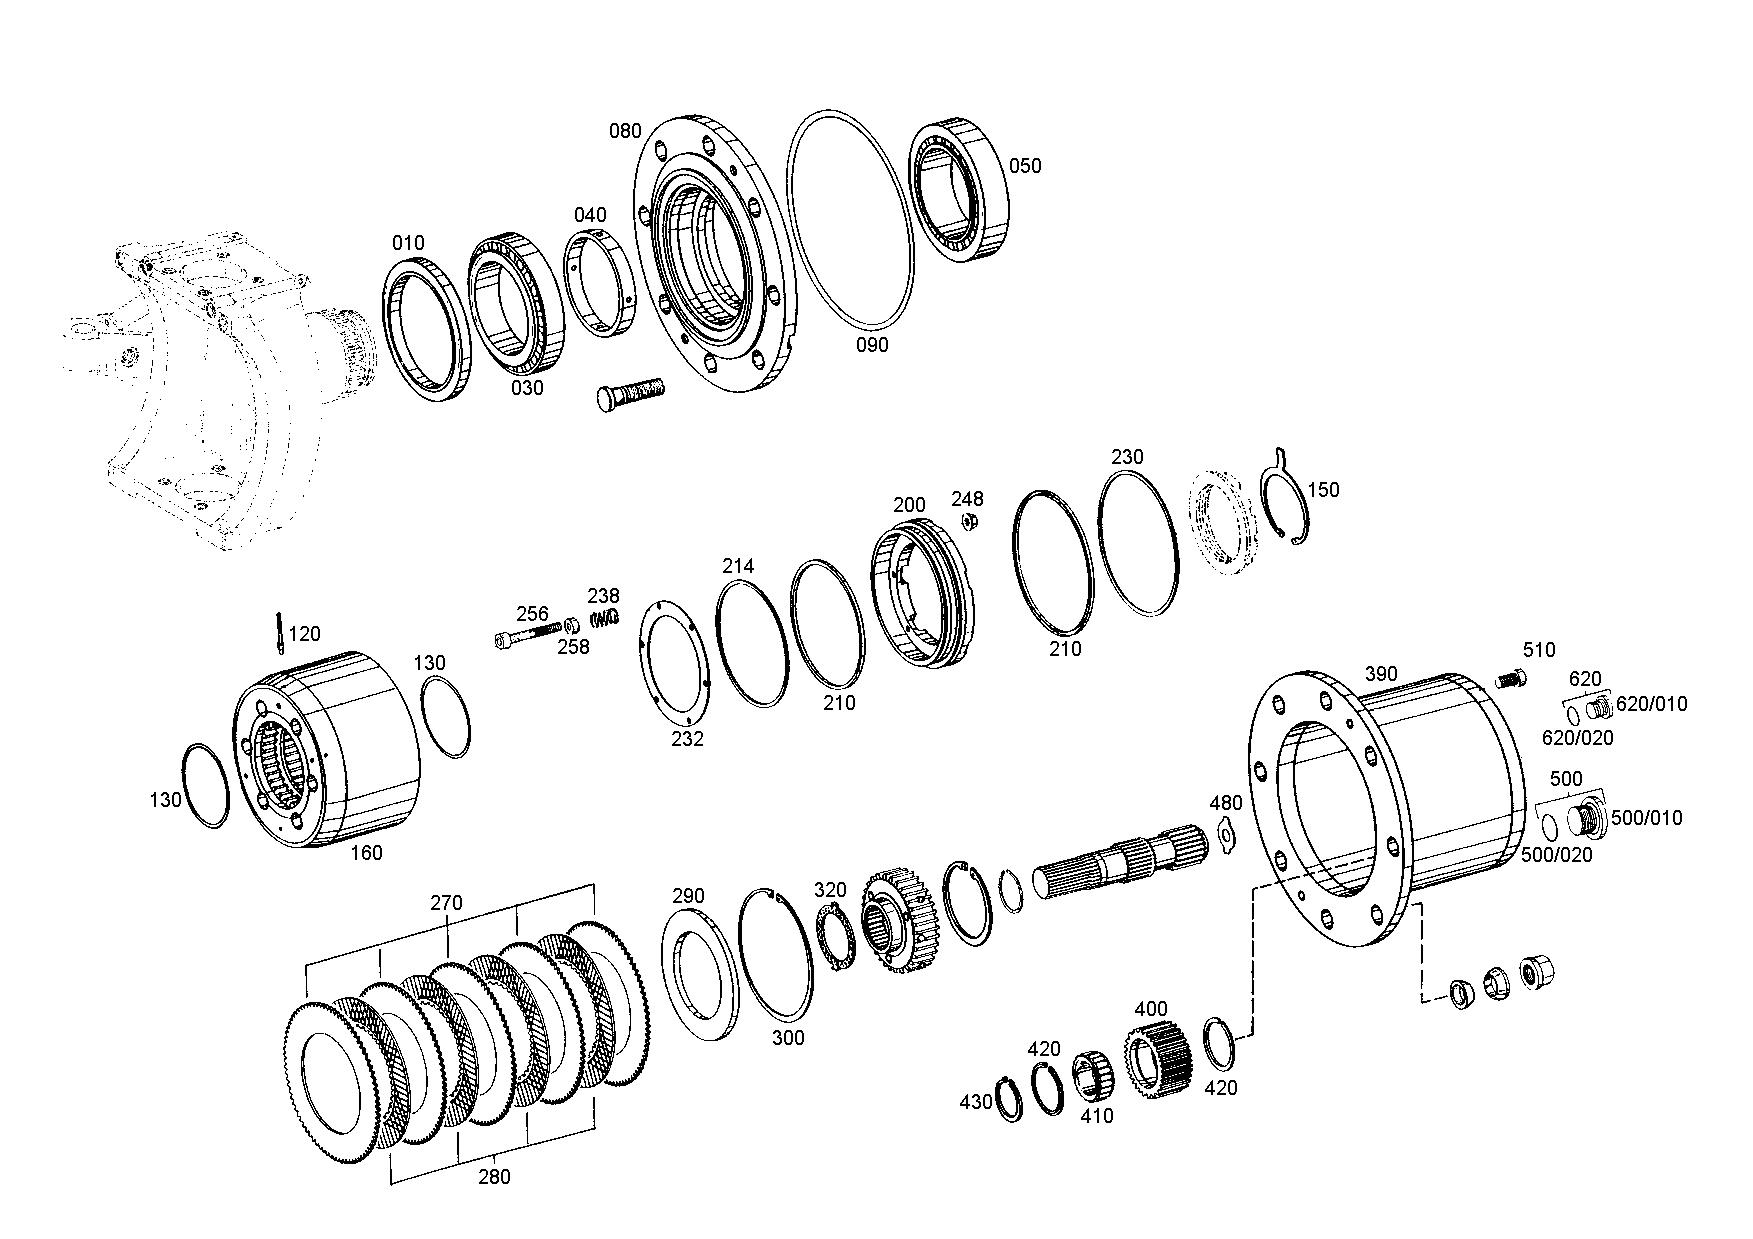 drawing for CATERPILLAR INC. 006111 - RING (figure 4)